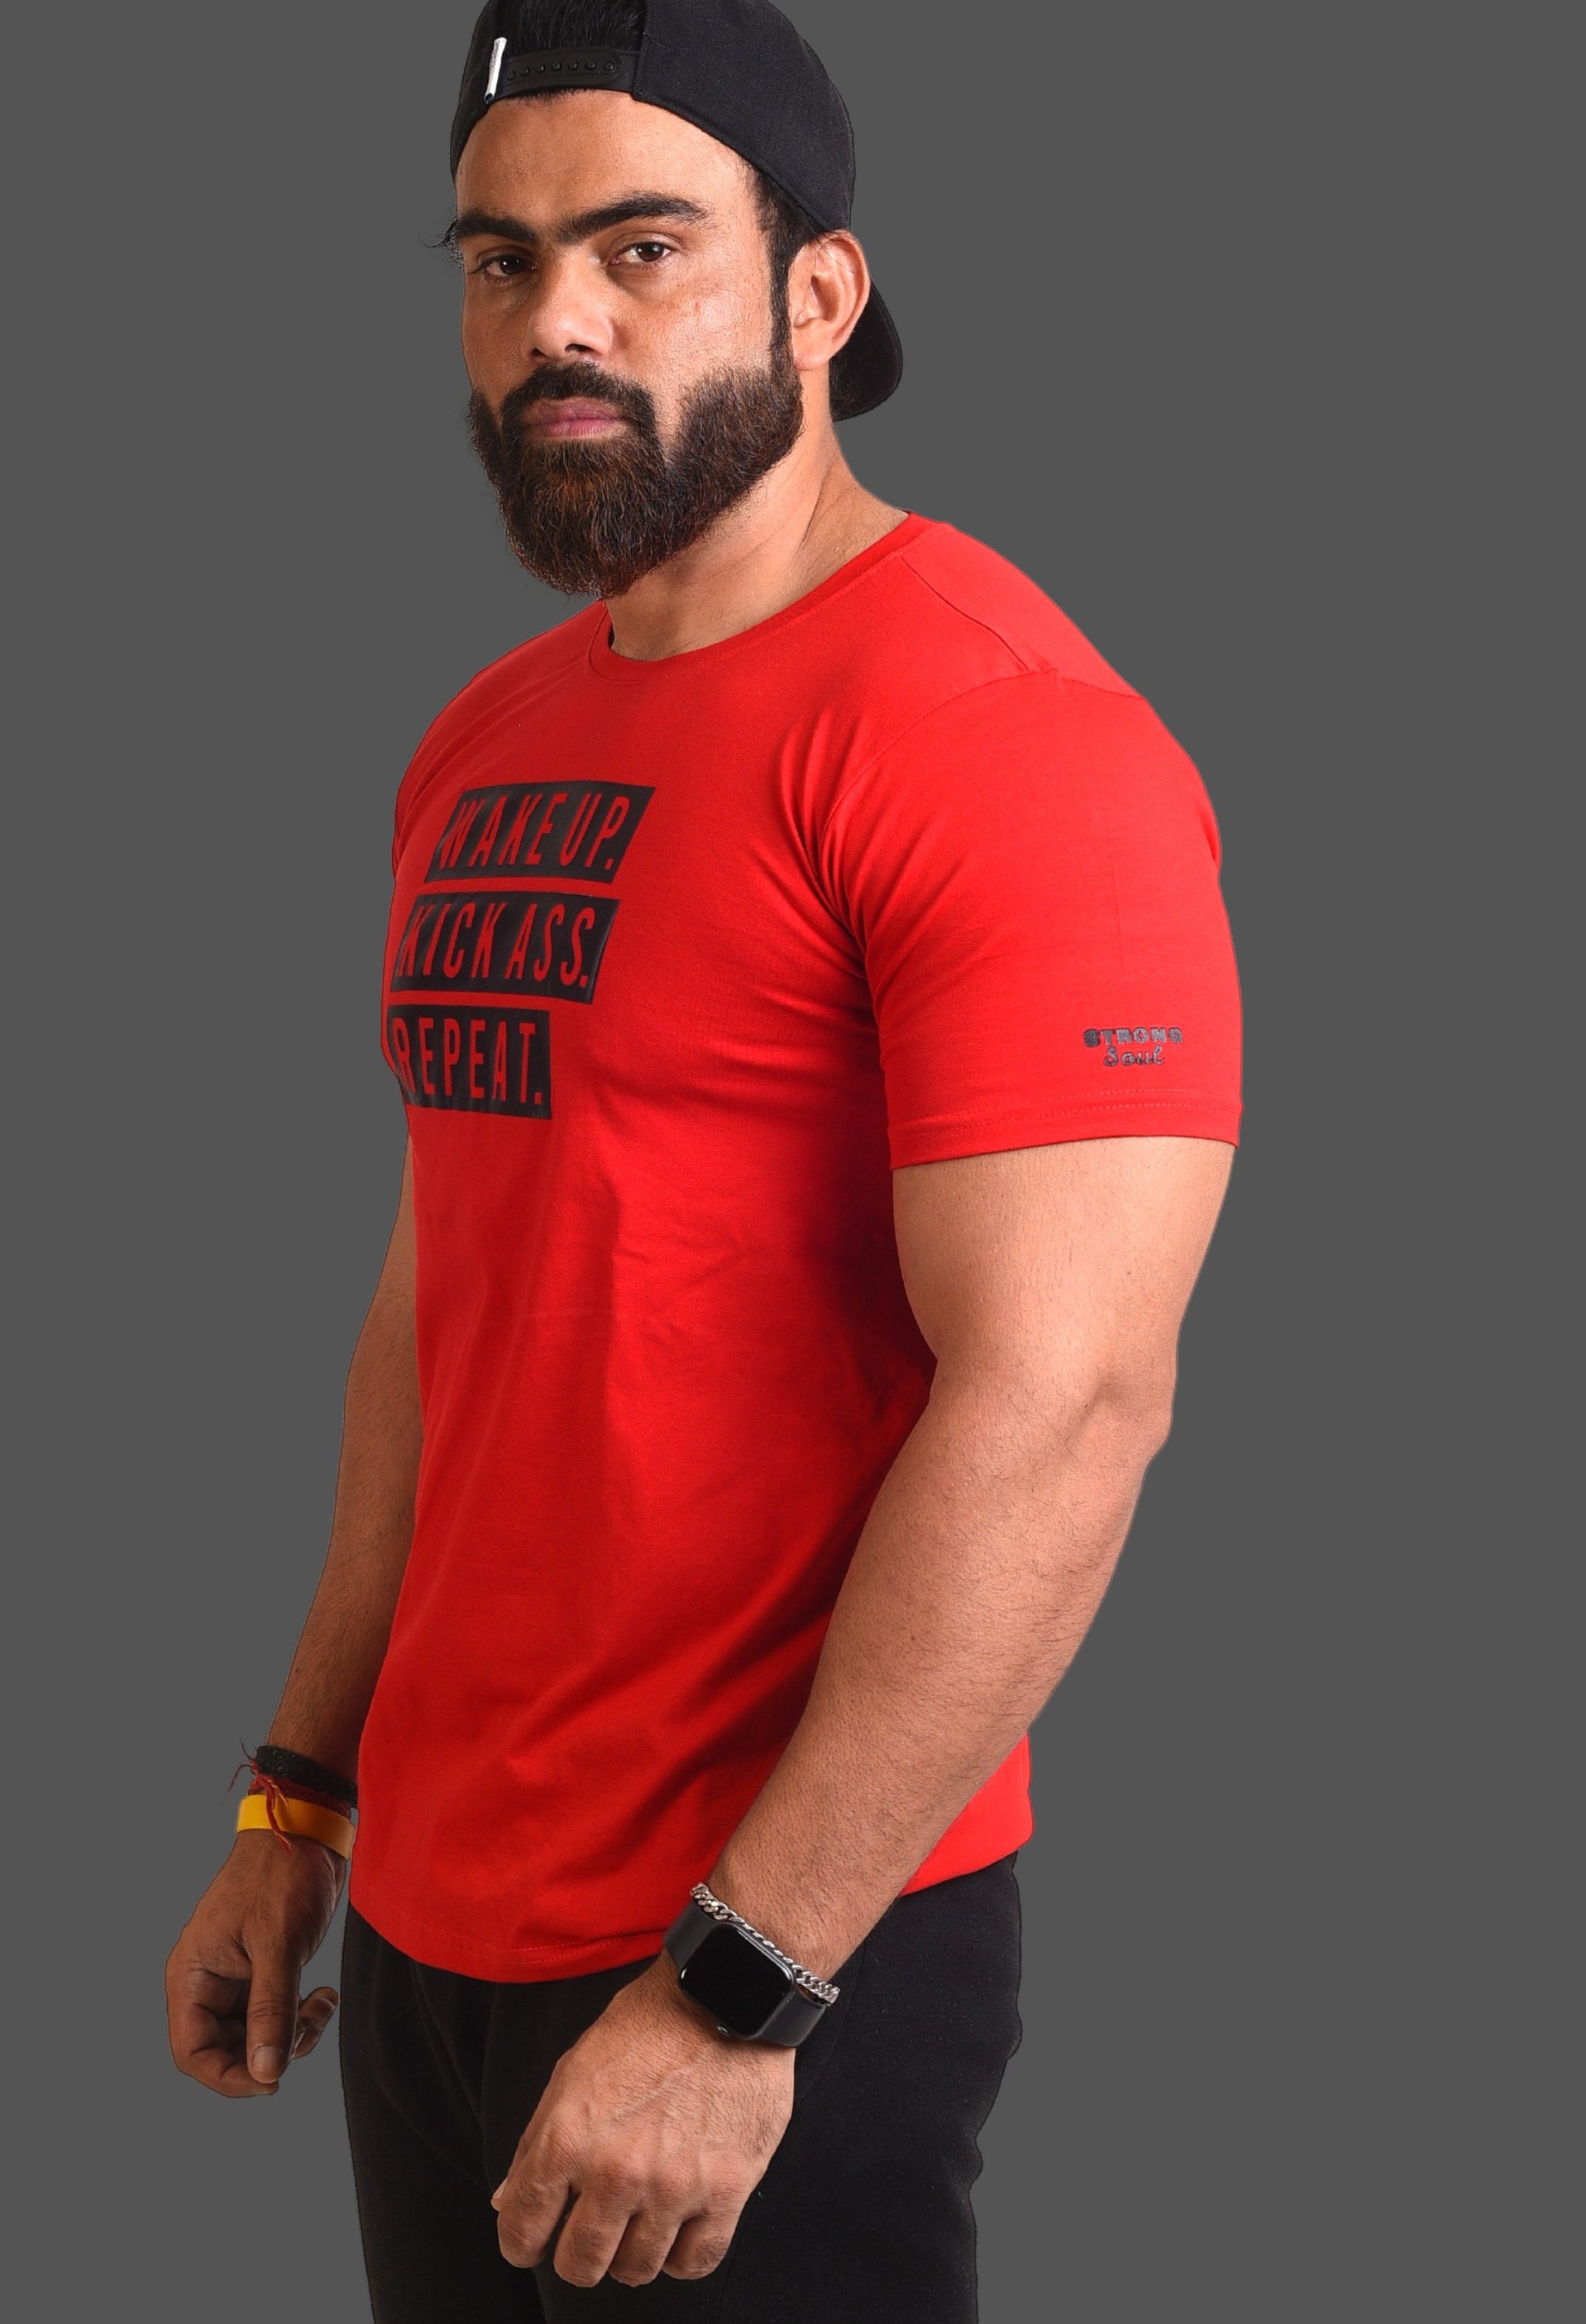 Gym T Shirt - Wake Up Kick Ass Repeat - Men T-Shirt with premium cotton Lycra. The Sports T Shirt by Strong Soul